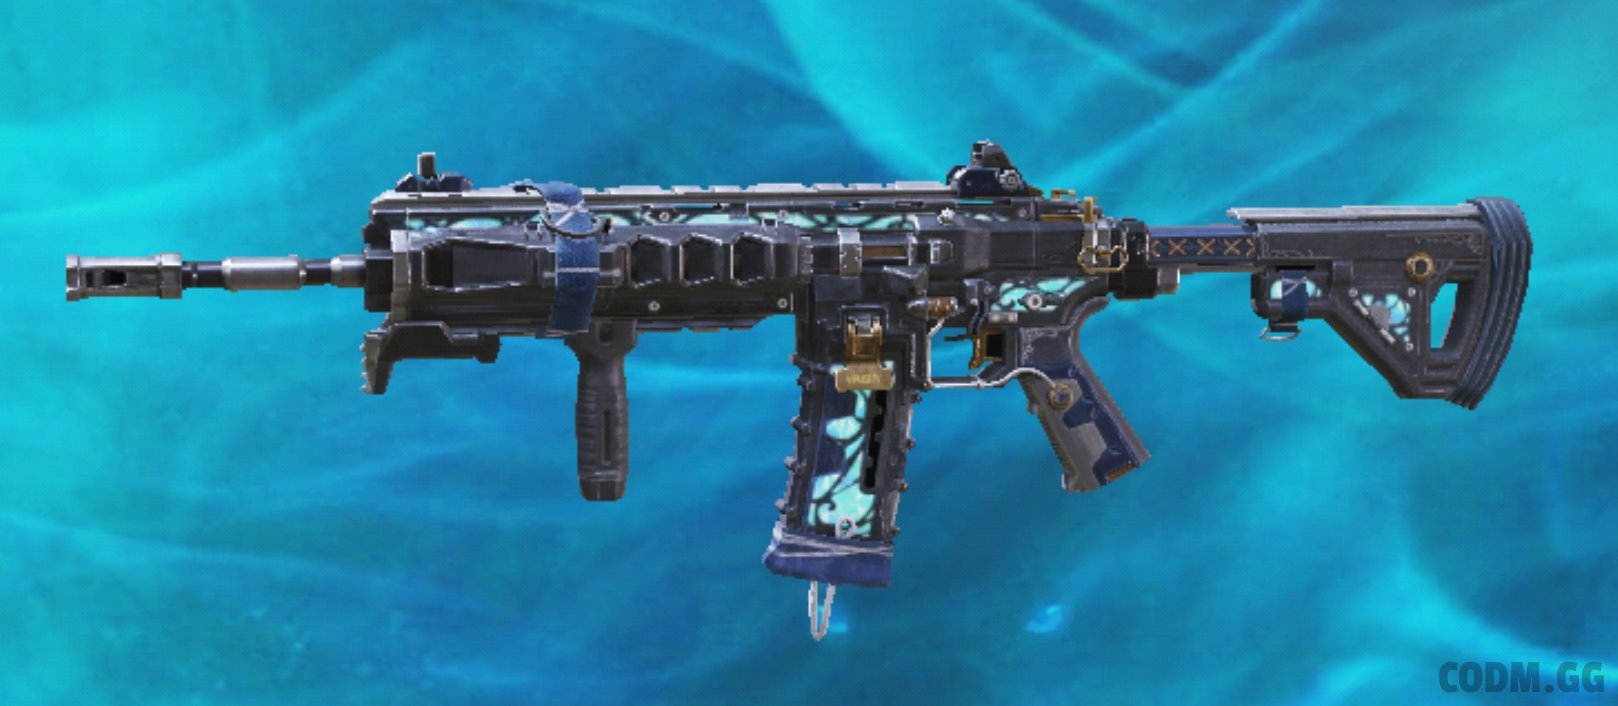 Fenrir Epic Icr 1 Blueprint In Call Of Duty Mobile Codm Gg